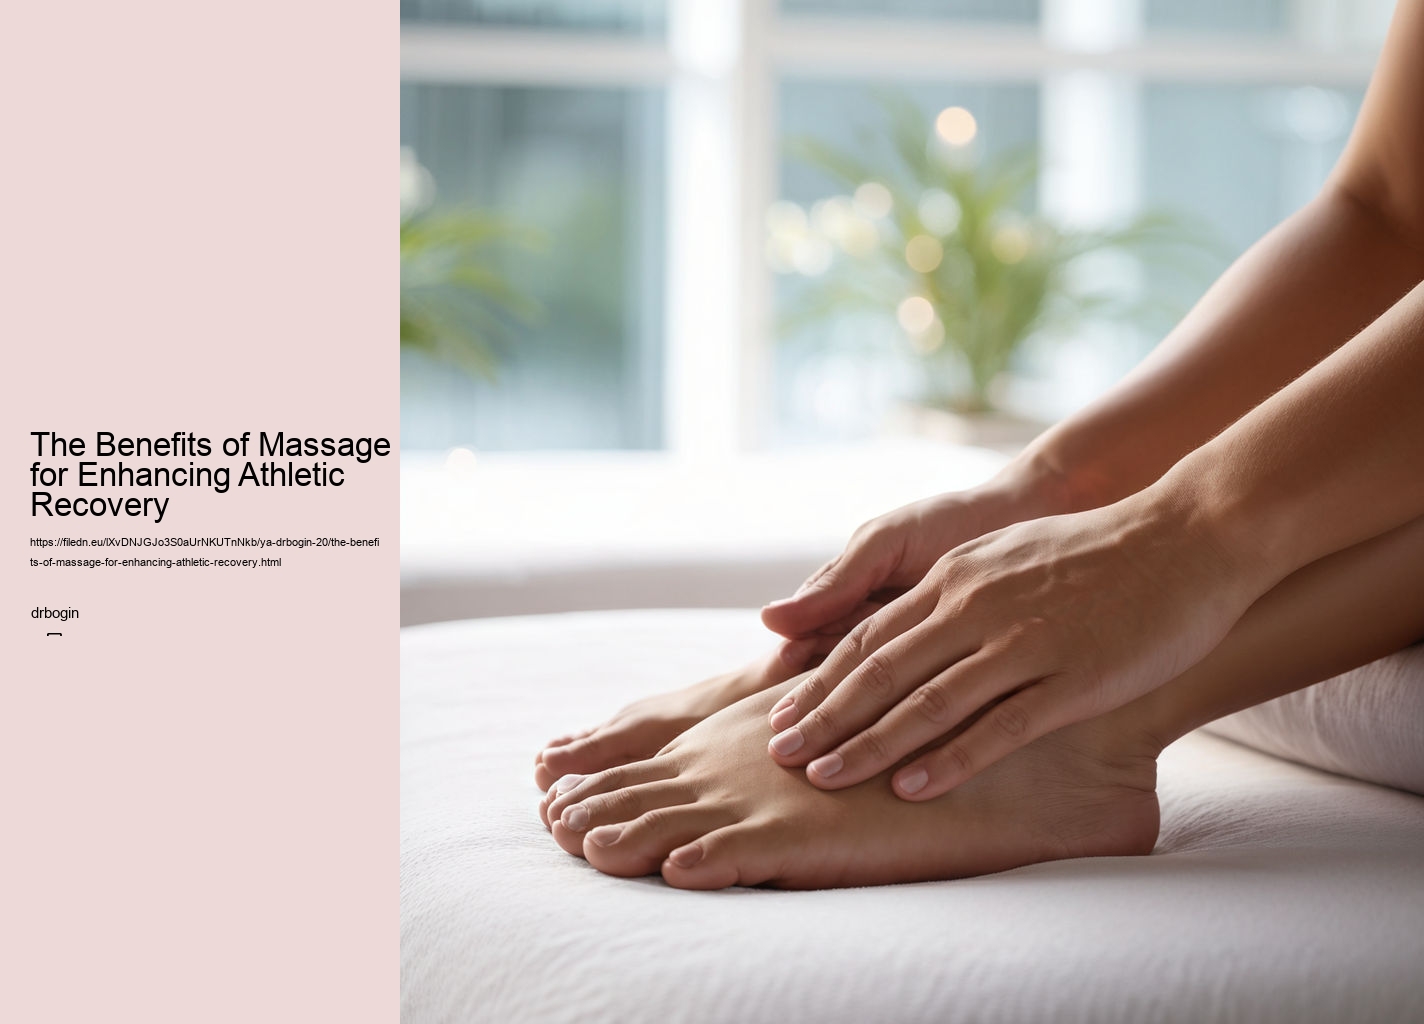 The Benefits of Massage for Enhancing Athletic Recovery